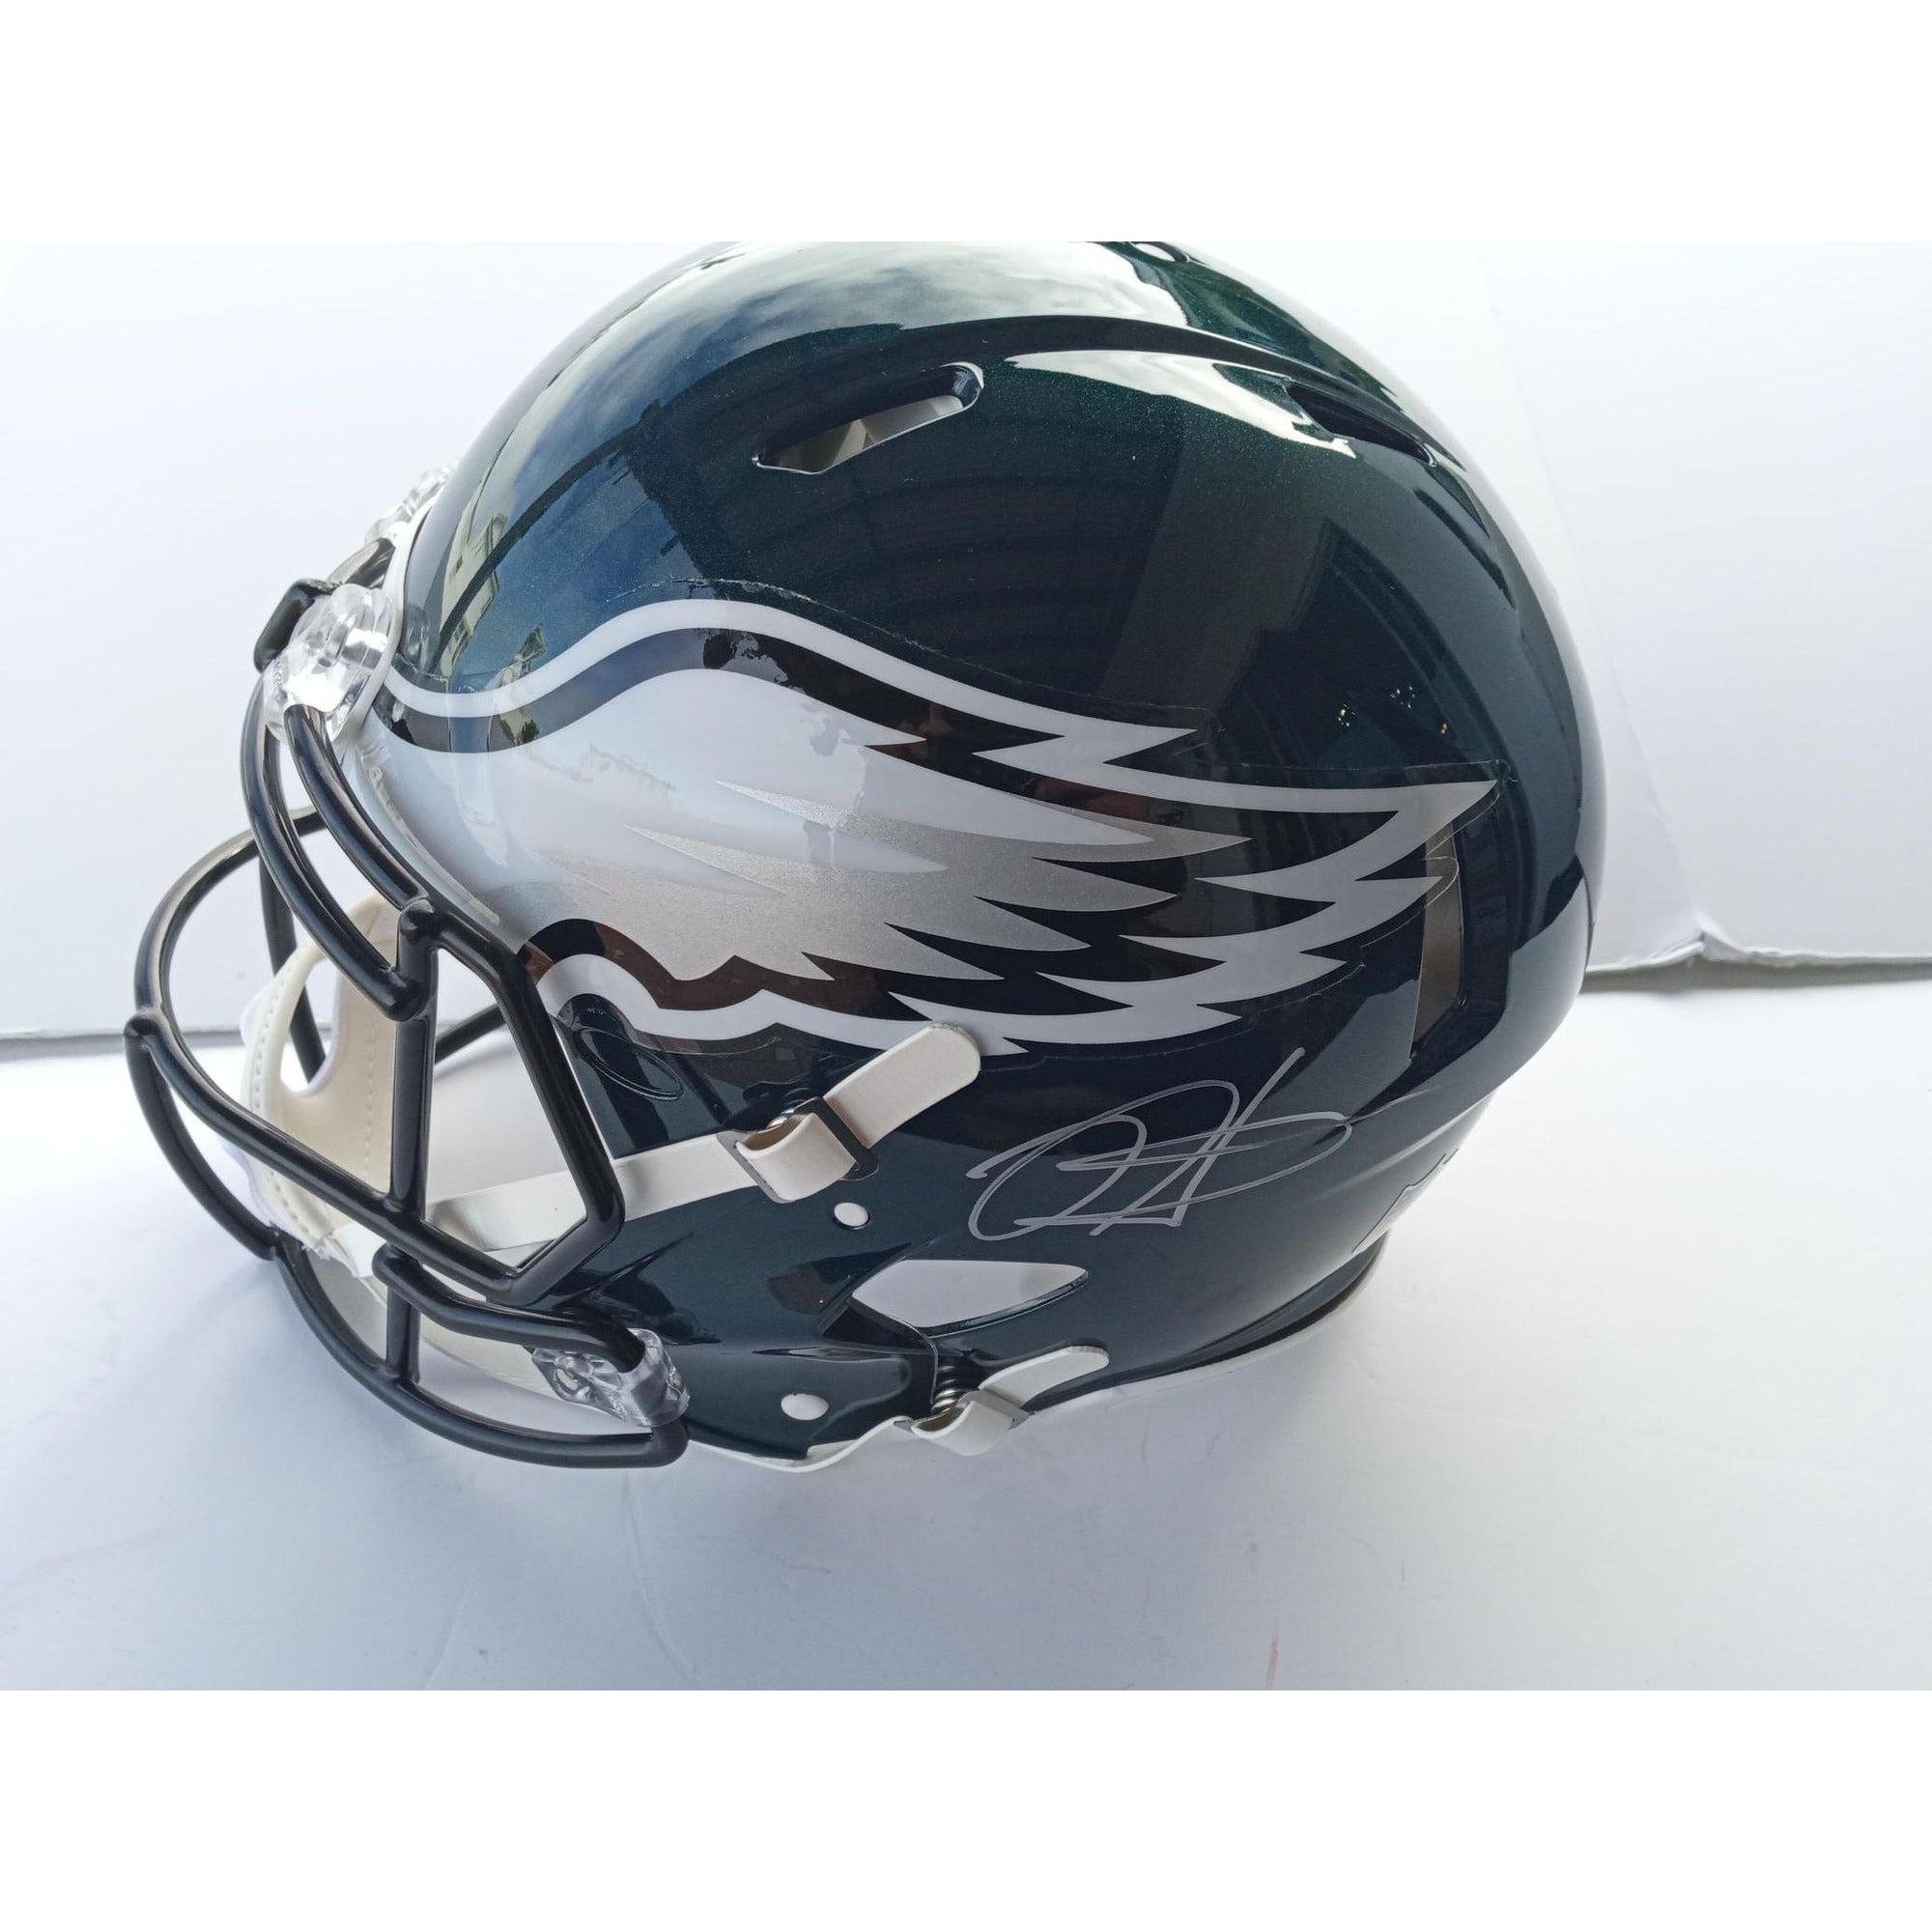 Philadelphia Eagles Jalen hurts Riedel speed authentic pro model helmet signed with proof and free acrylic display case